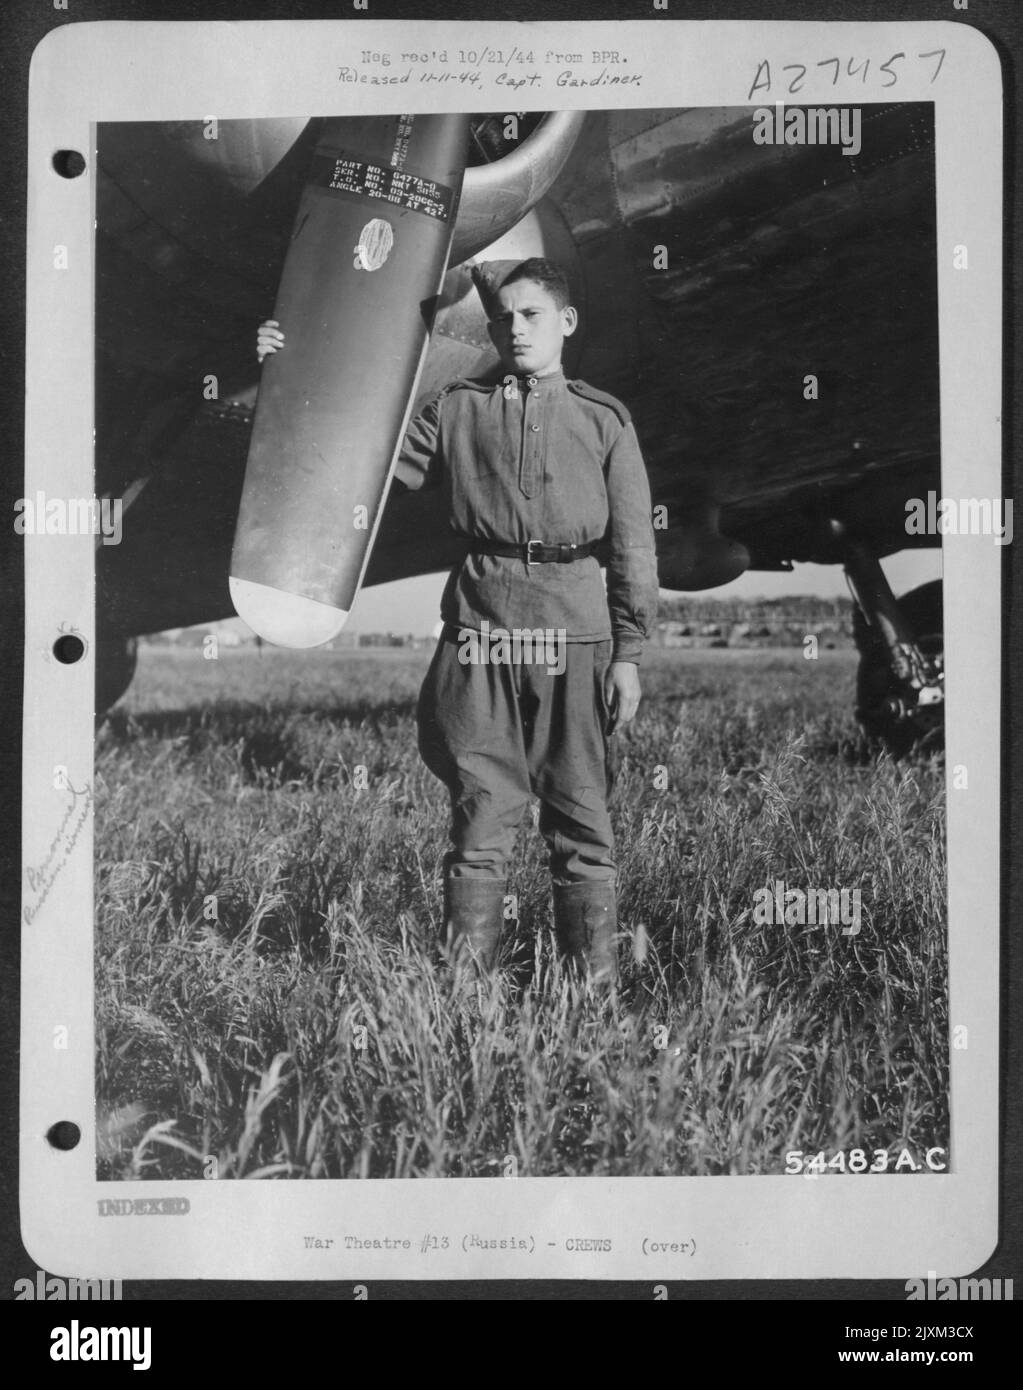 Majer Gildyngoryn, a young 15 year old Polish soldier stands beside a Boeing B-17. This youngster has been fighting the Germans since he was 11 years old. He saw his own mother killed by the Germans and immediately enlisted in the Polish Partisans. Stock Photo